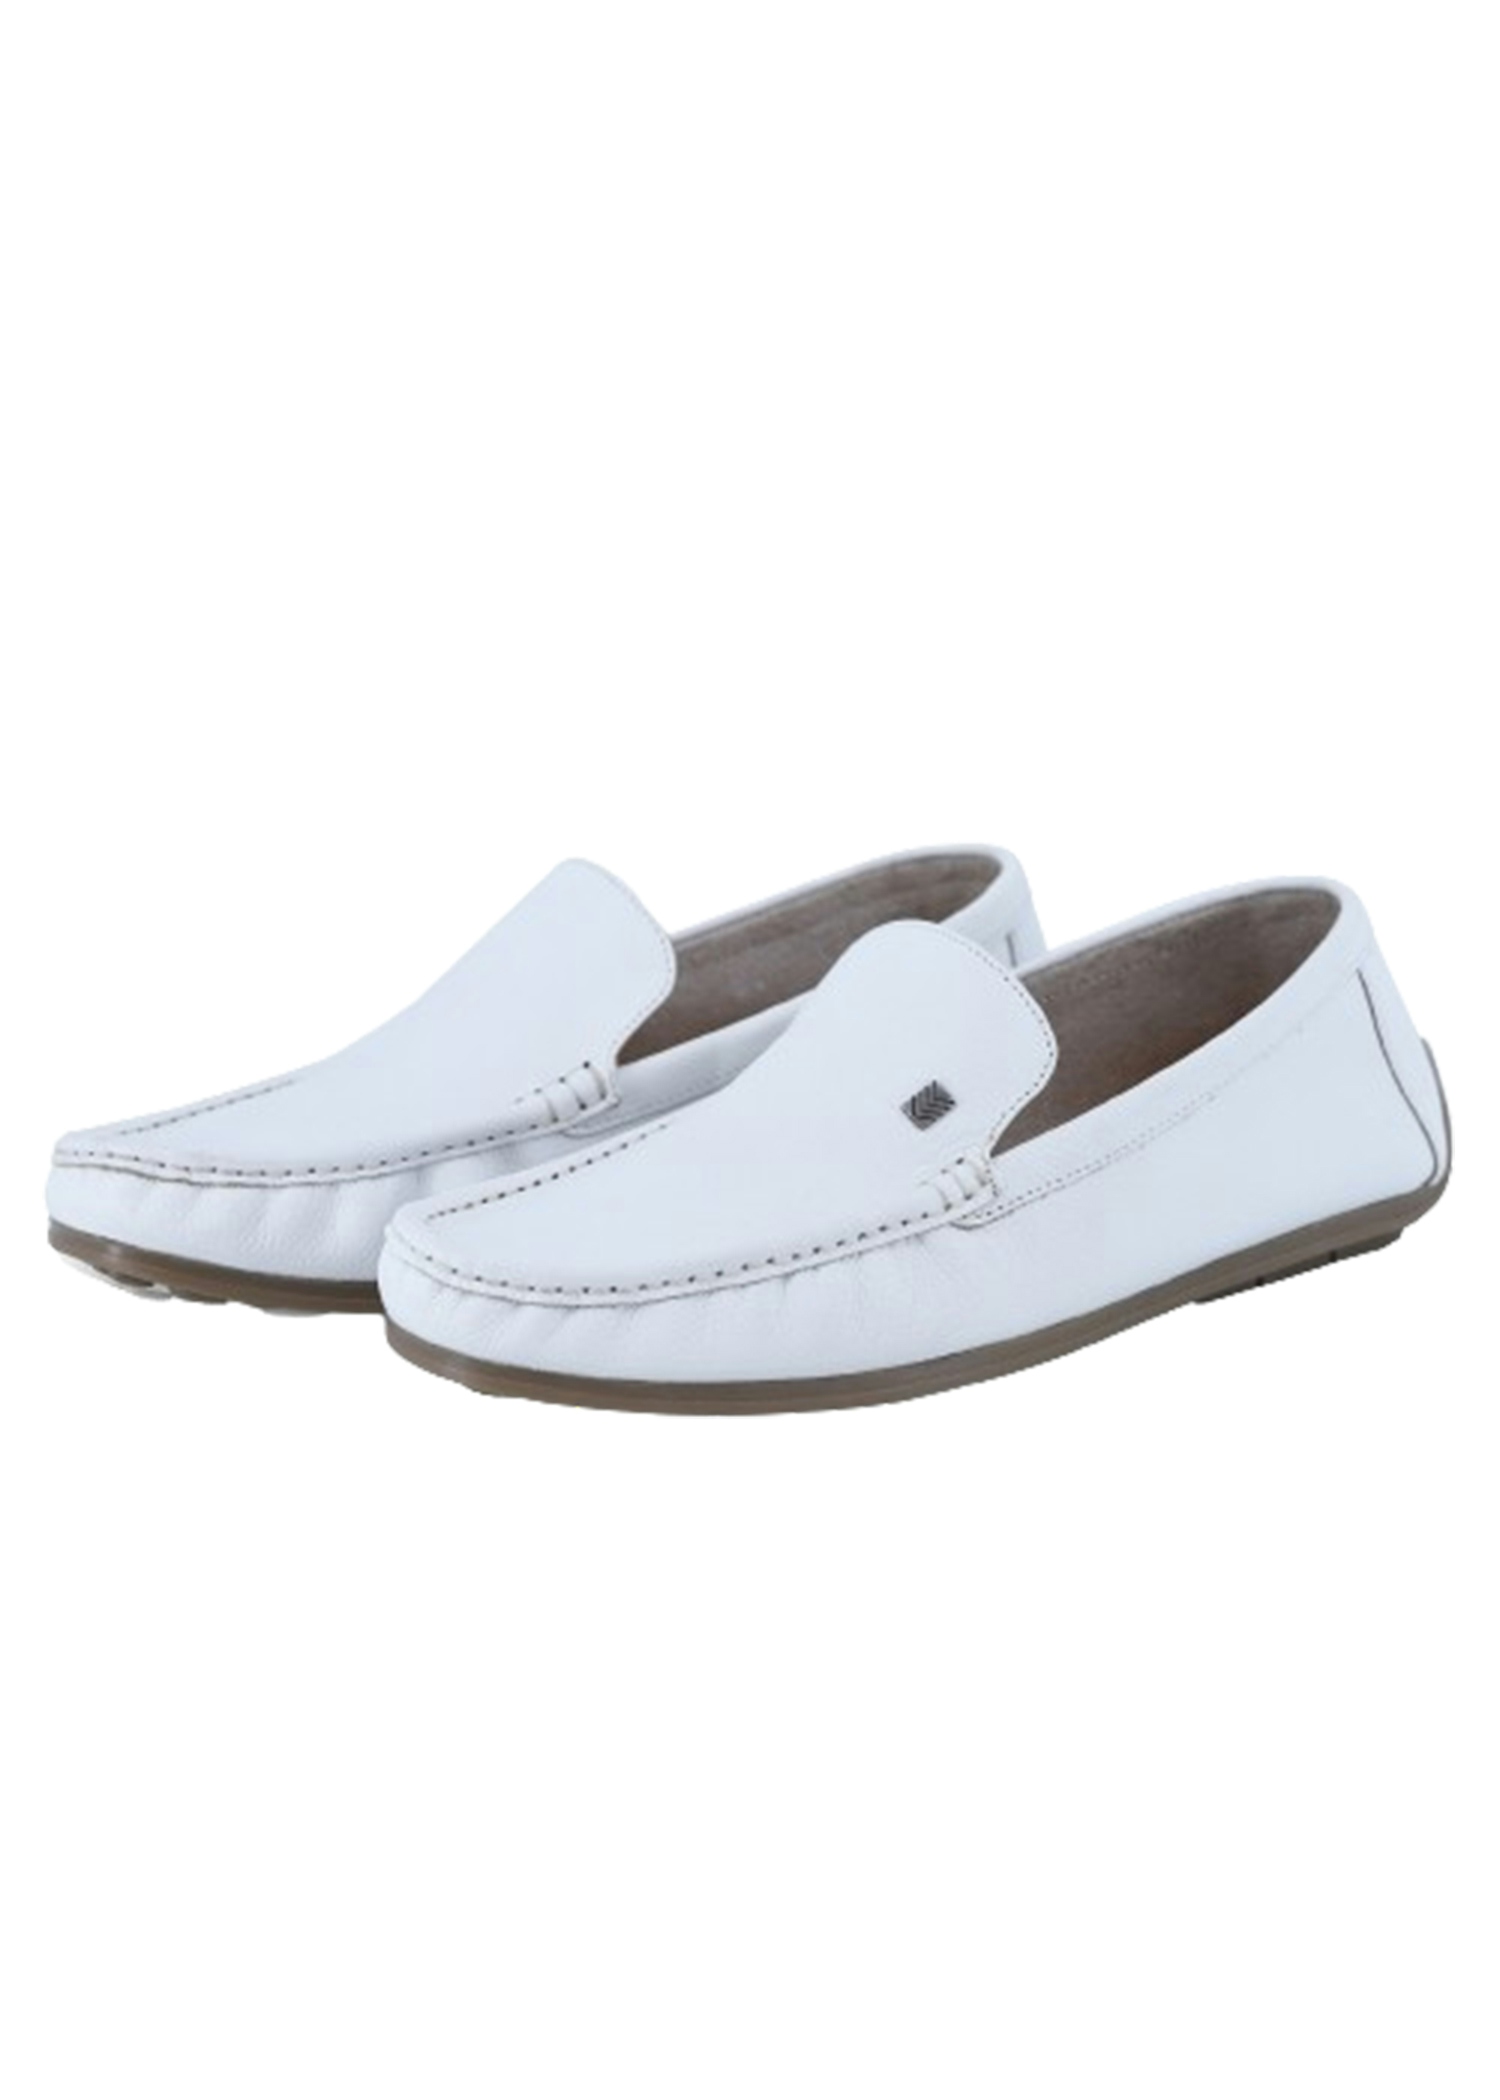 deer mens shoes white color straight